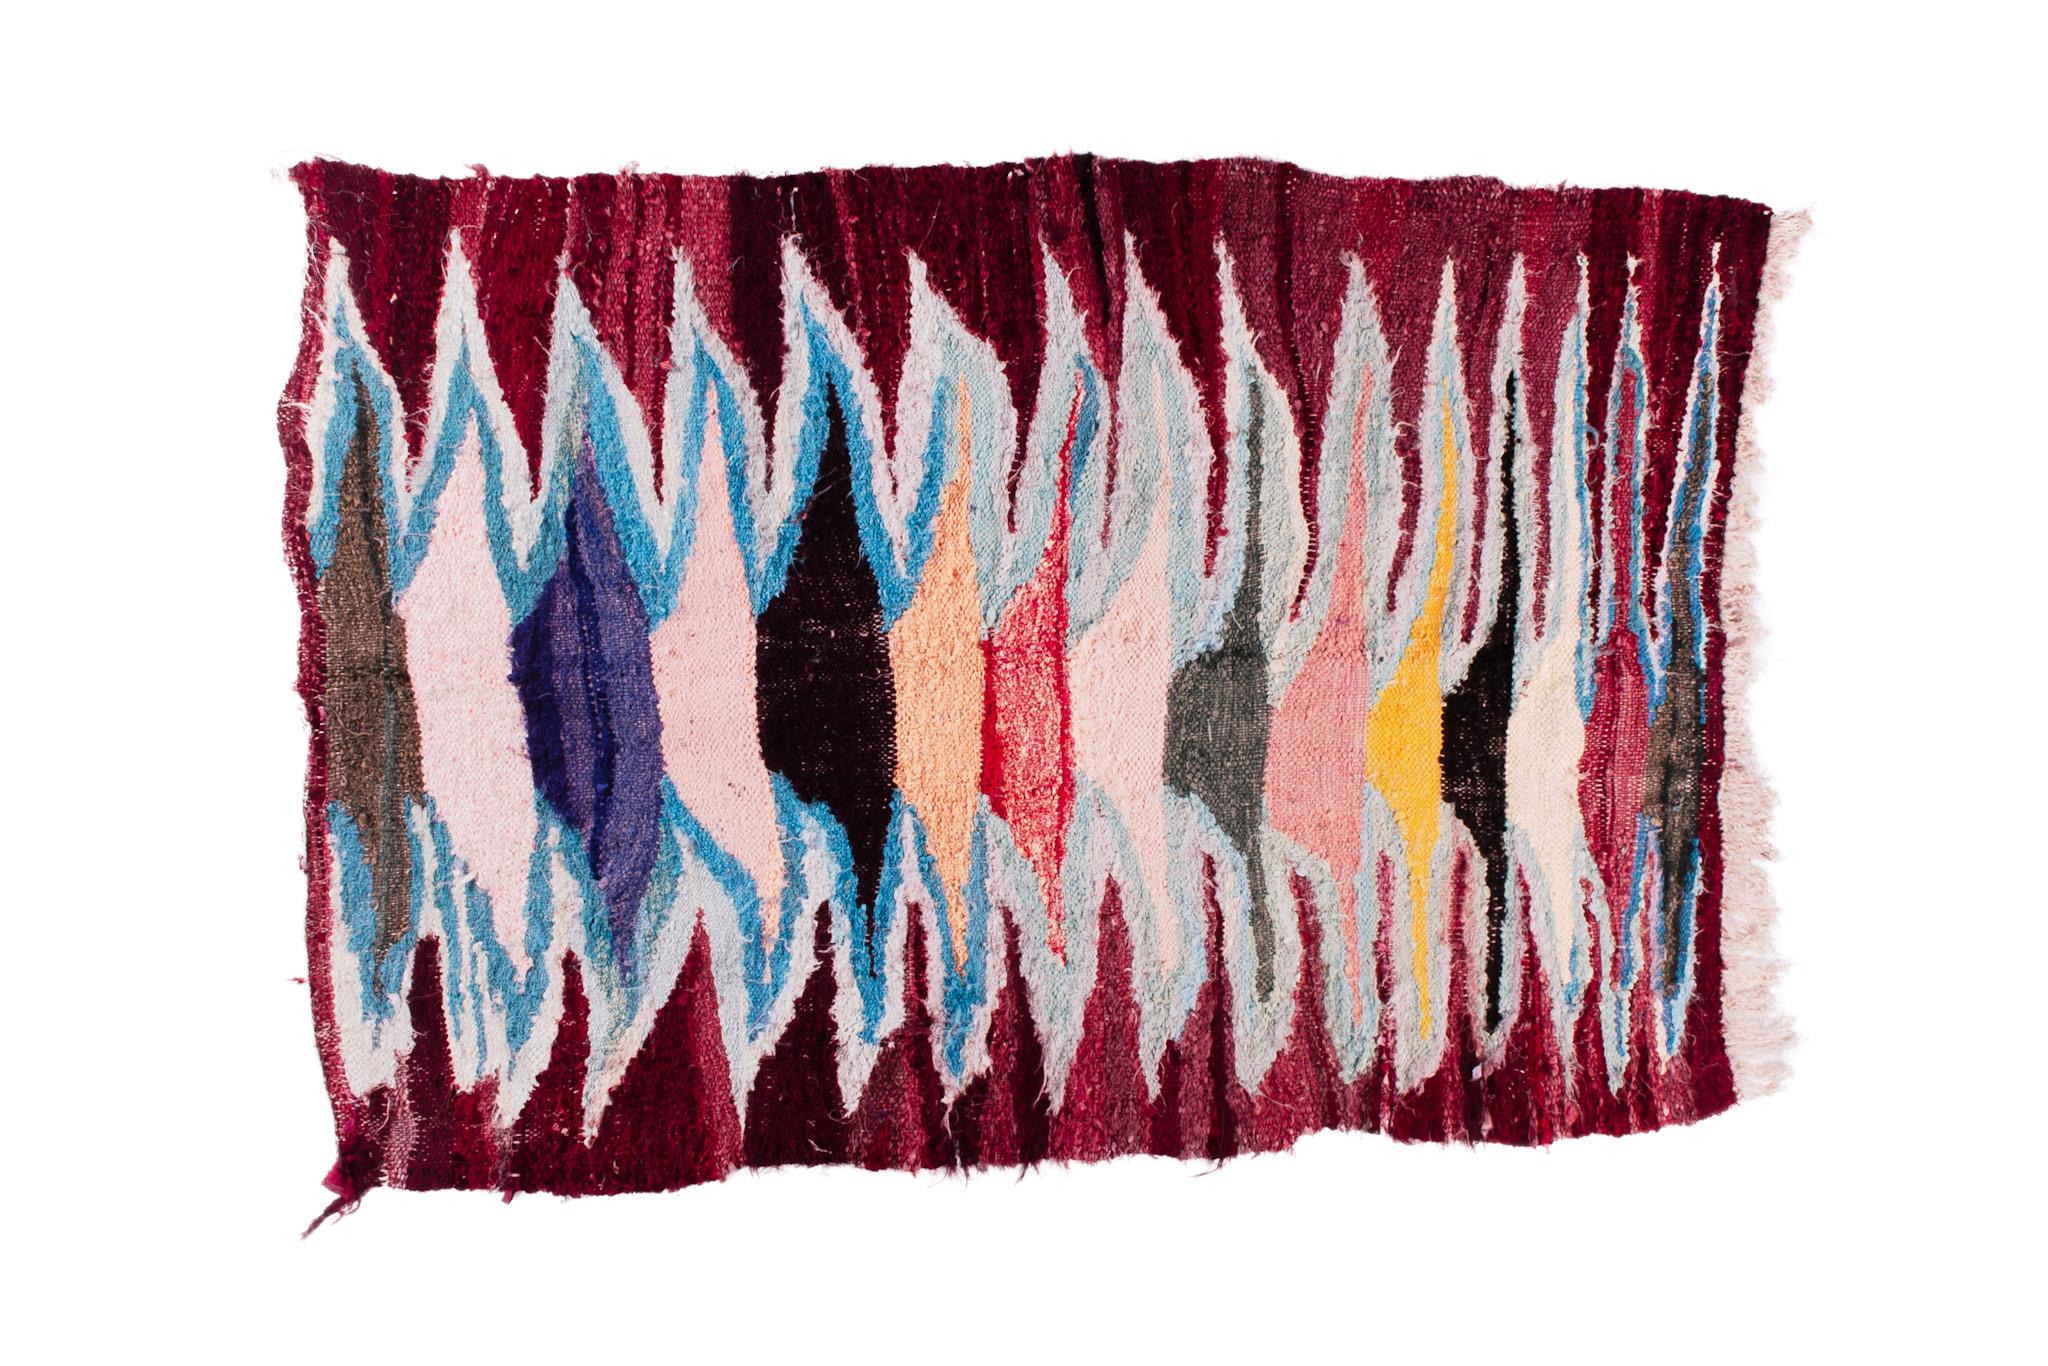 Boucharouite rugs are made of multicolored clothes pieces. This is the most authentic recycled rug you've ever seen! Measurements: 4'х6' / 182x125 cm.

Boucharouite – is the ancient manual technique of tying and interweaving the multicolored clothes